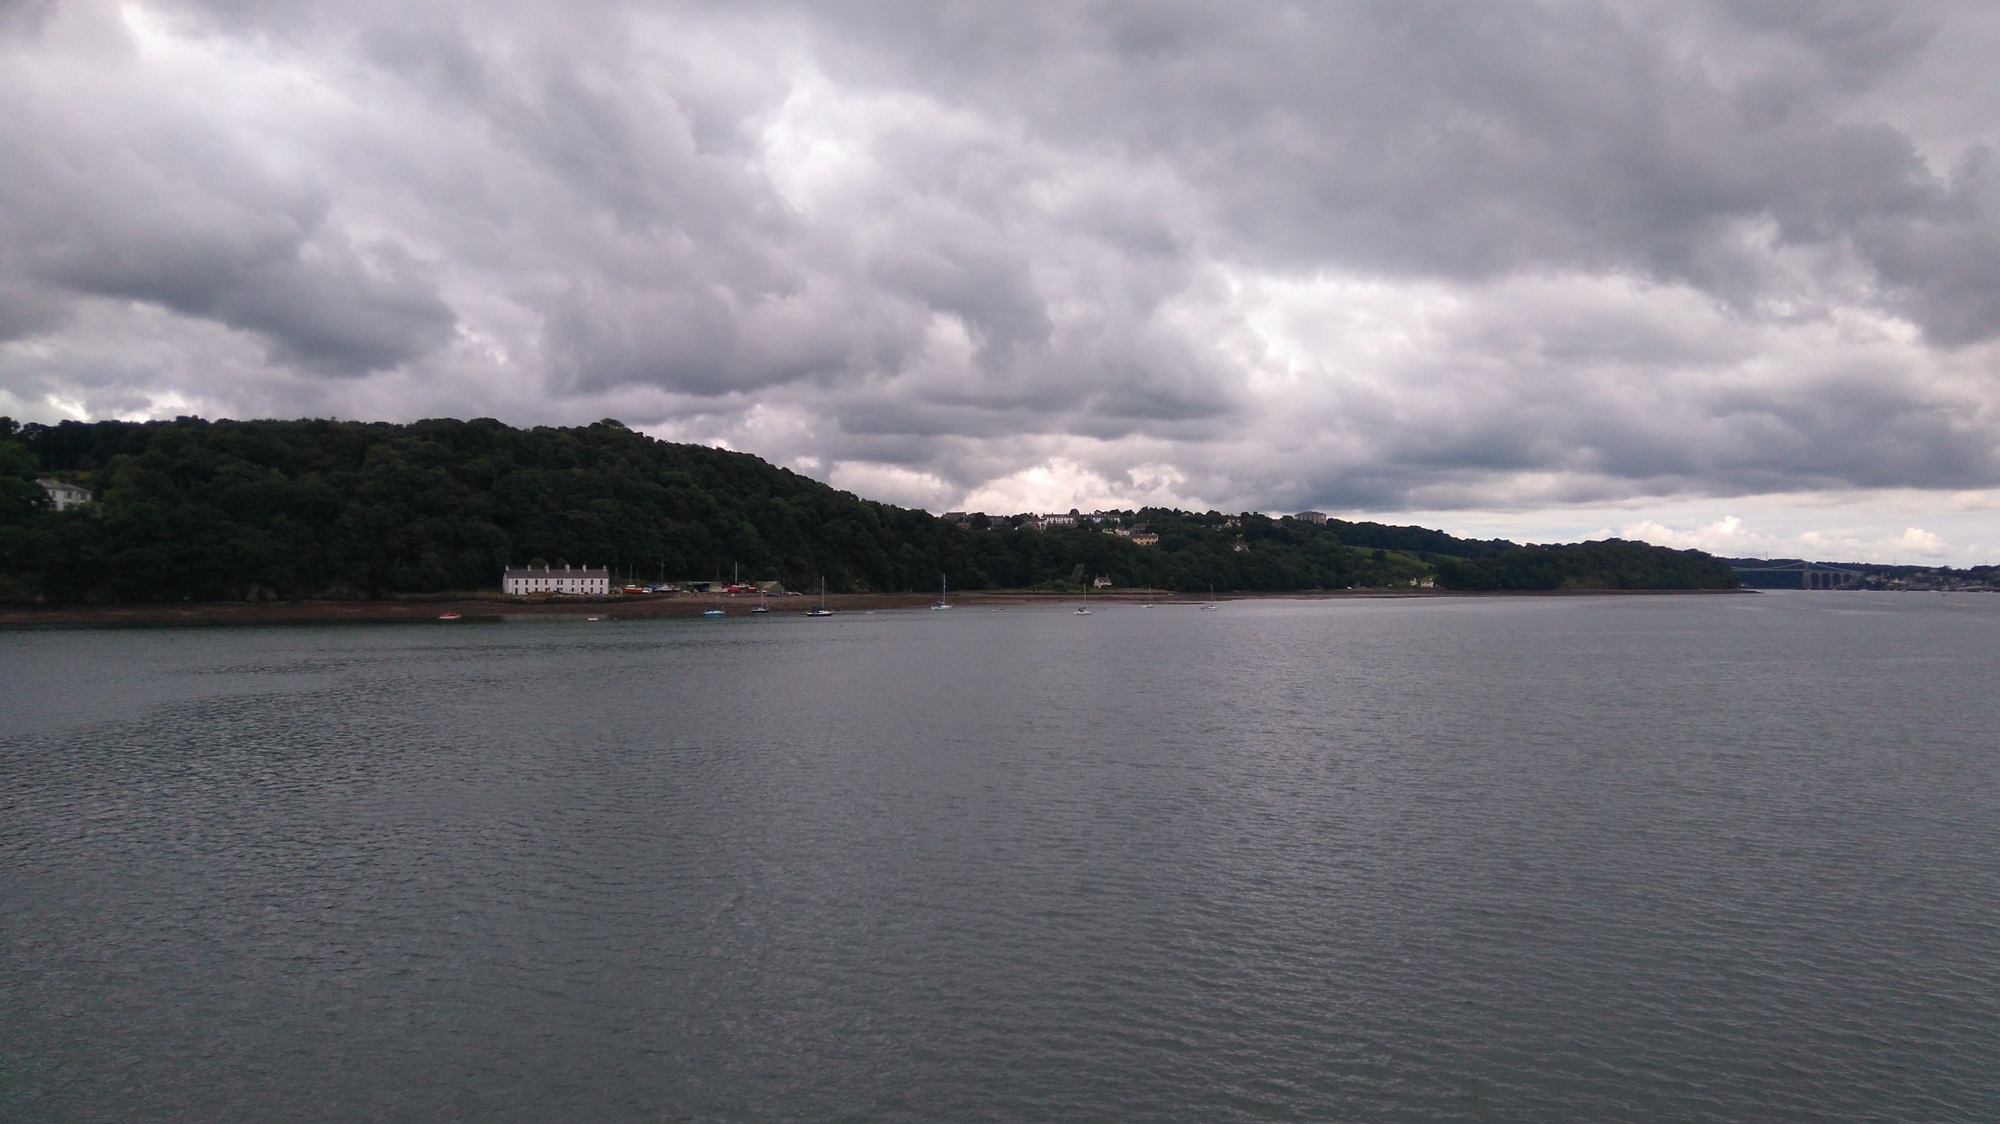 Looking across the Menai Strait at Anglesey on a cloudy summer day. The sea is calm, and the coastline is hilly and wooded.